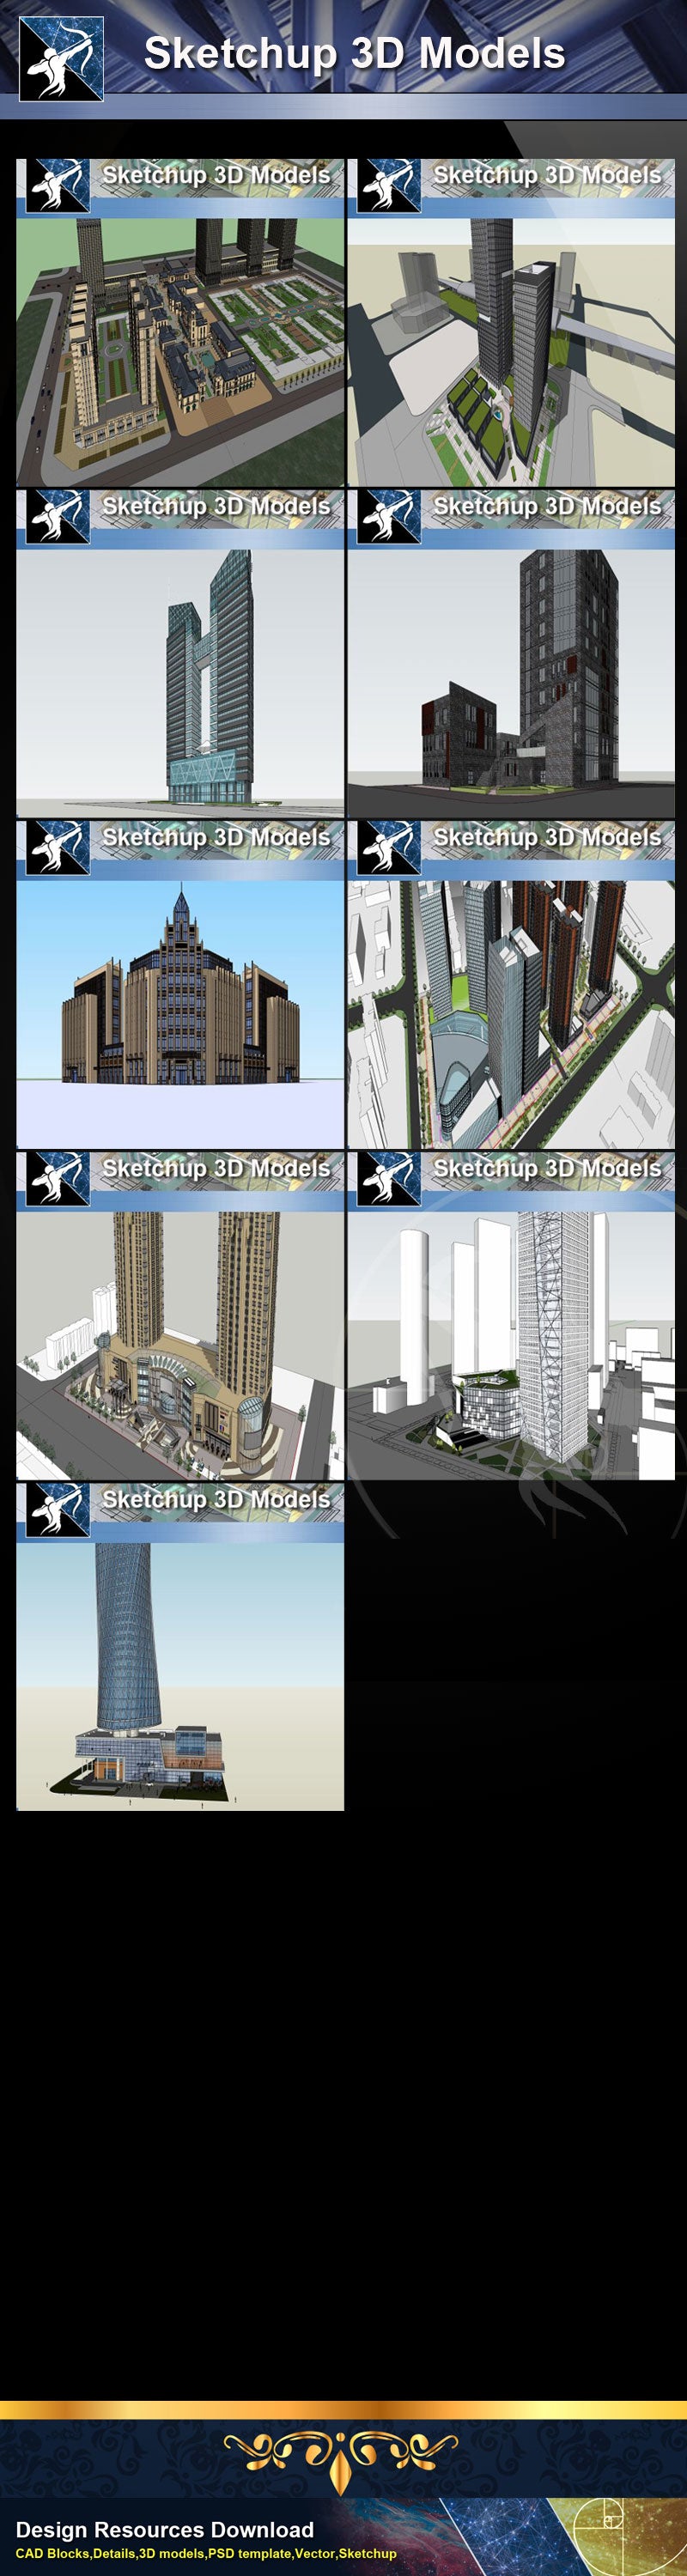 ★★Best 37 Types of Commercial,Shopping Mall Sketchup 3D Models Collection(Recommanded!!)